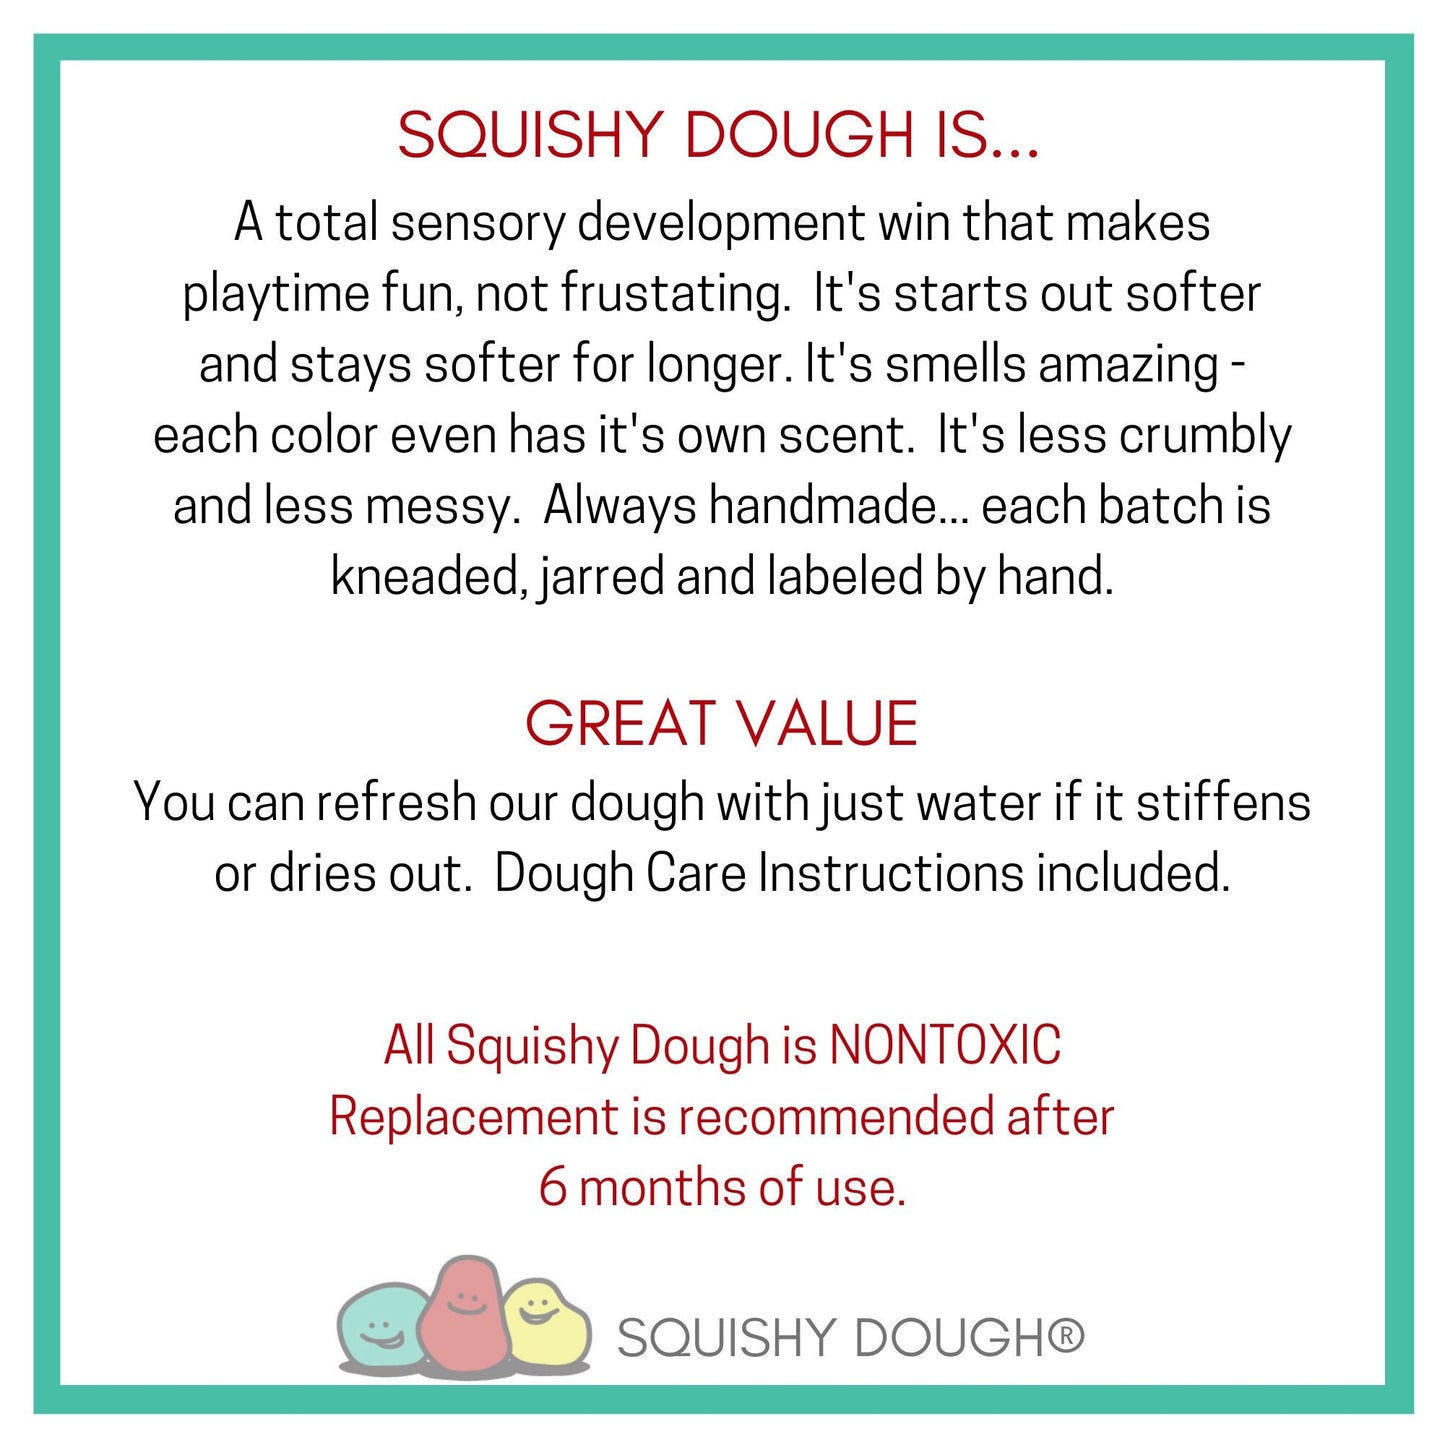 All the Squishy Doughs in 2 oz Jars